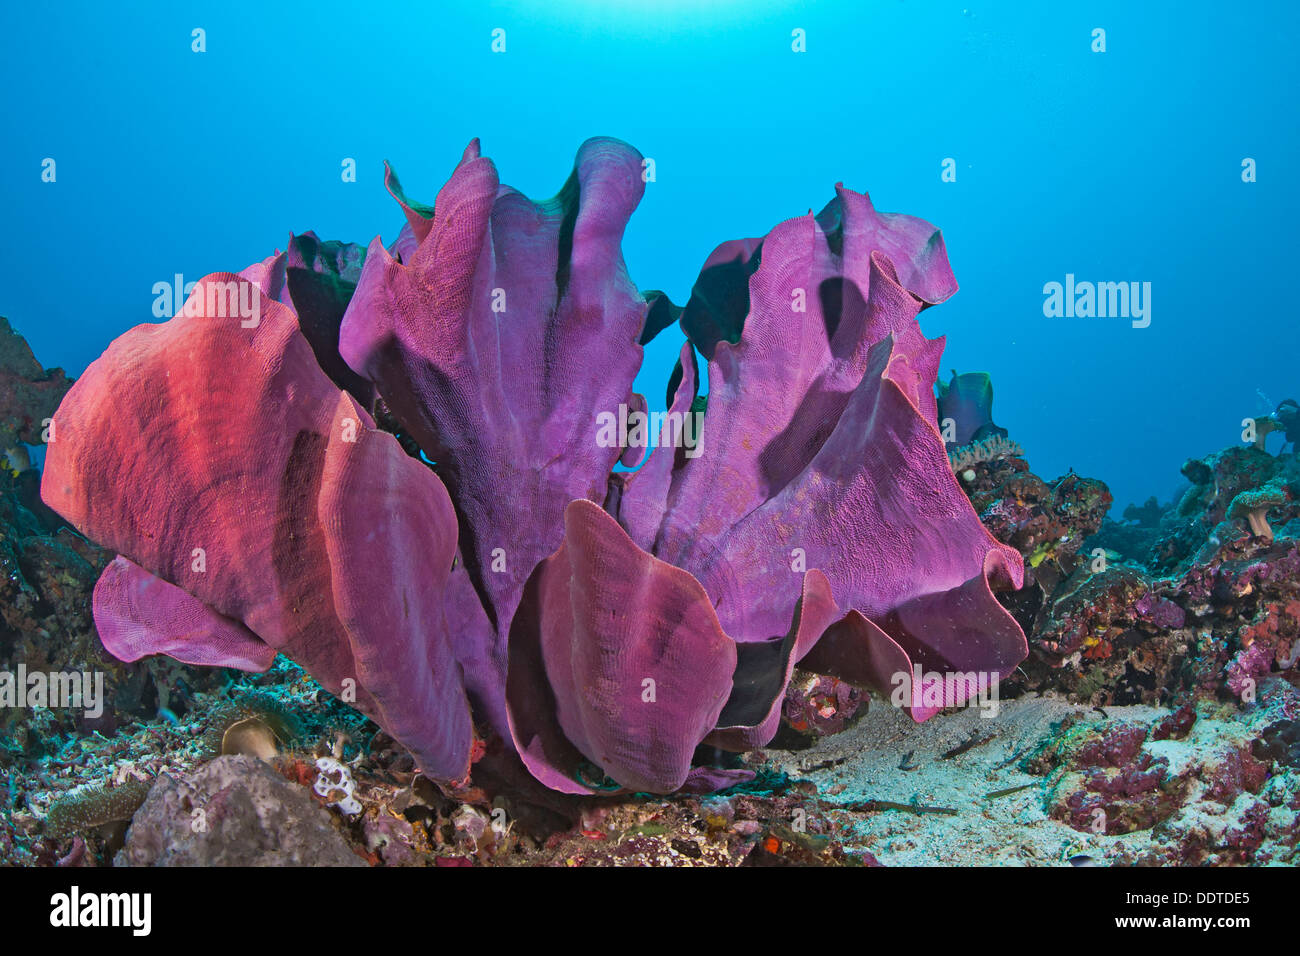 Close up image of large pink elephant ear sponge with contrasting blue water background. Raja Ampat, Indonesia Stock Photo